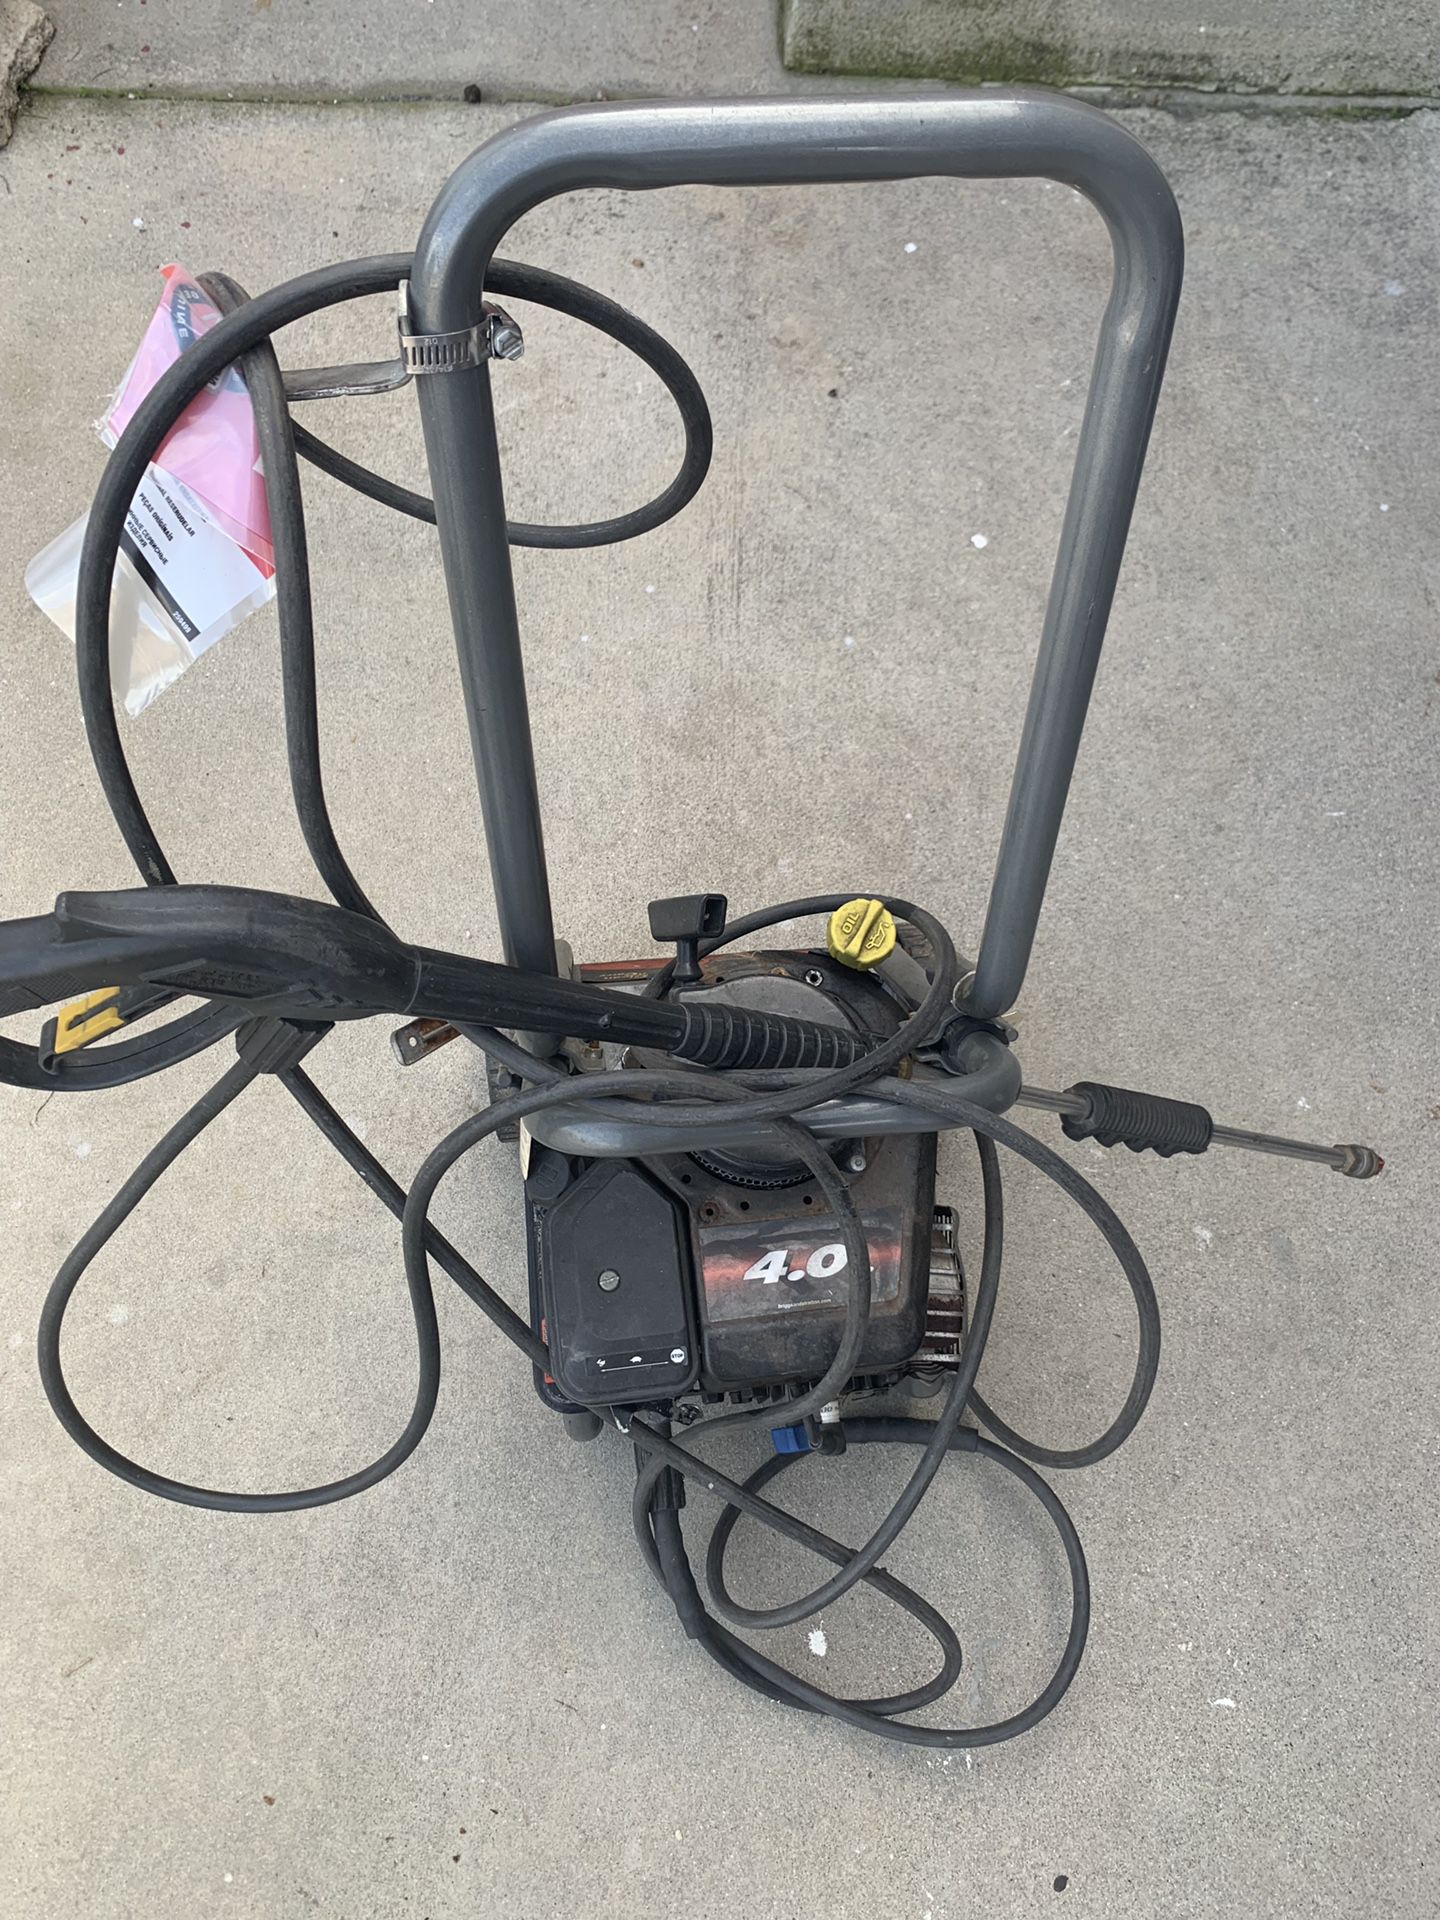 Craftsman Clean and Carry Pressure Washer - 2150 PSI / 1.9 GPM 4.0 HP